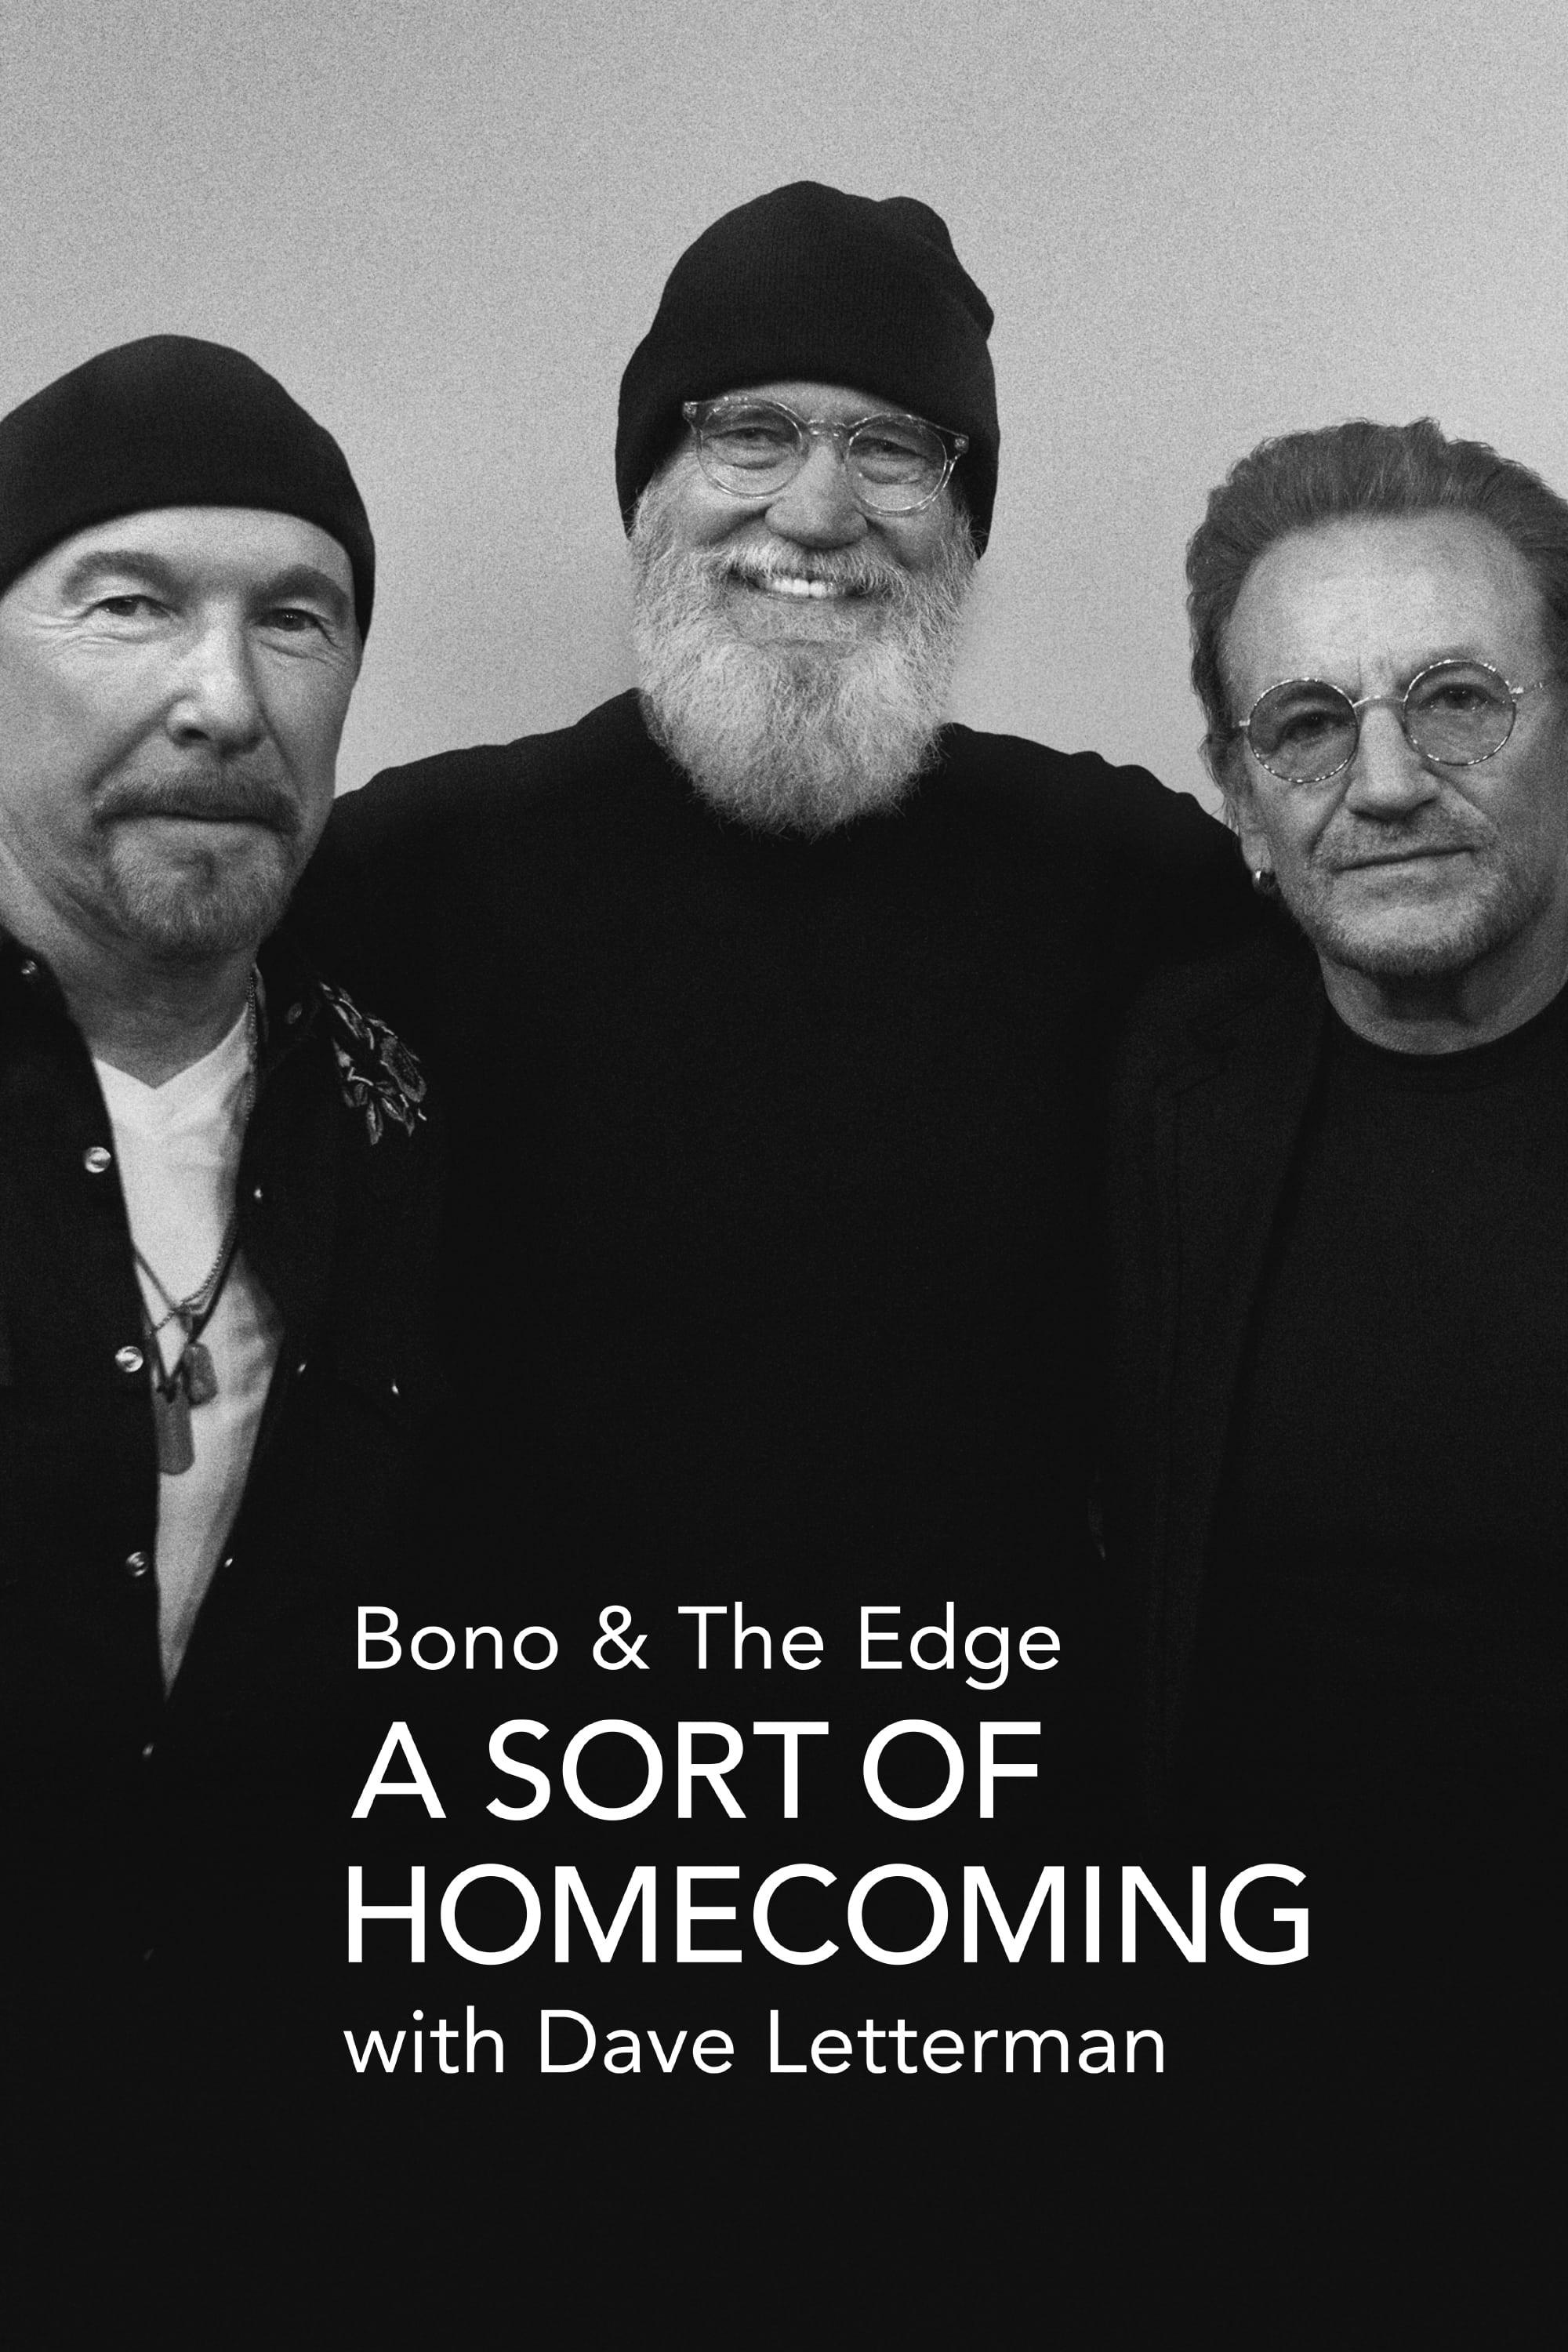 Bono & The Edge: A Sort of Homecoming with Dave Letterman poster